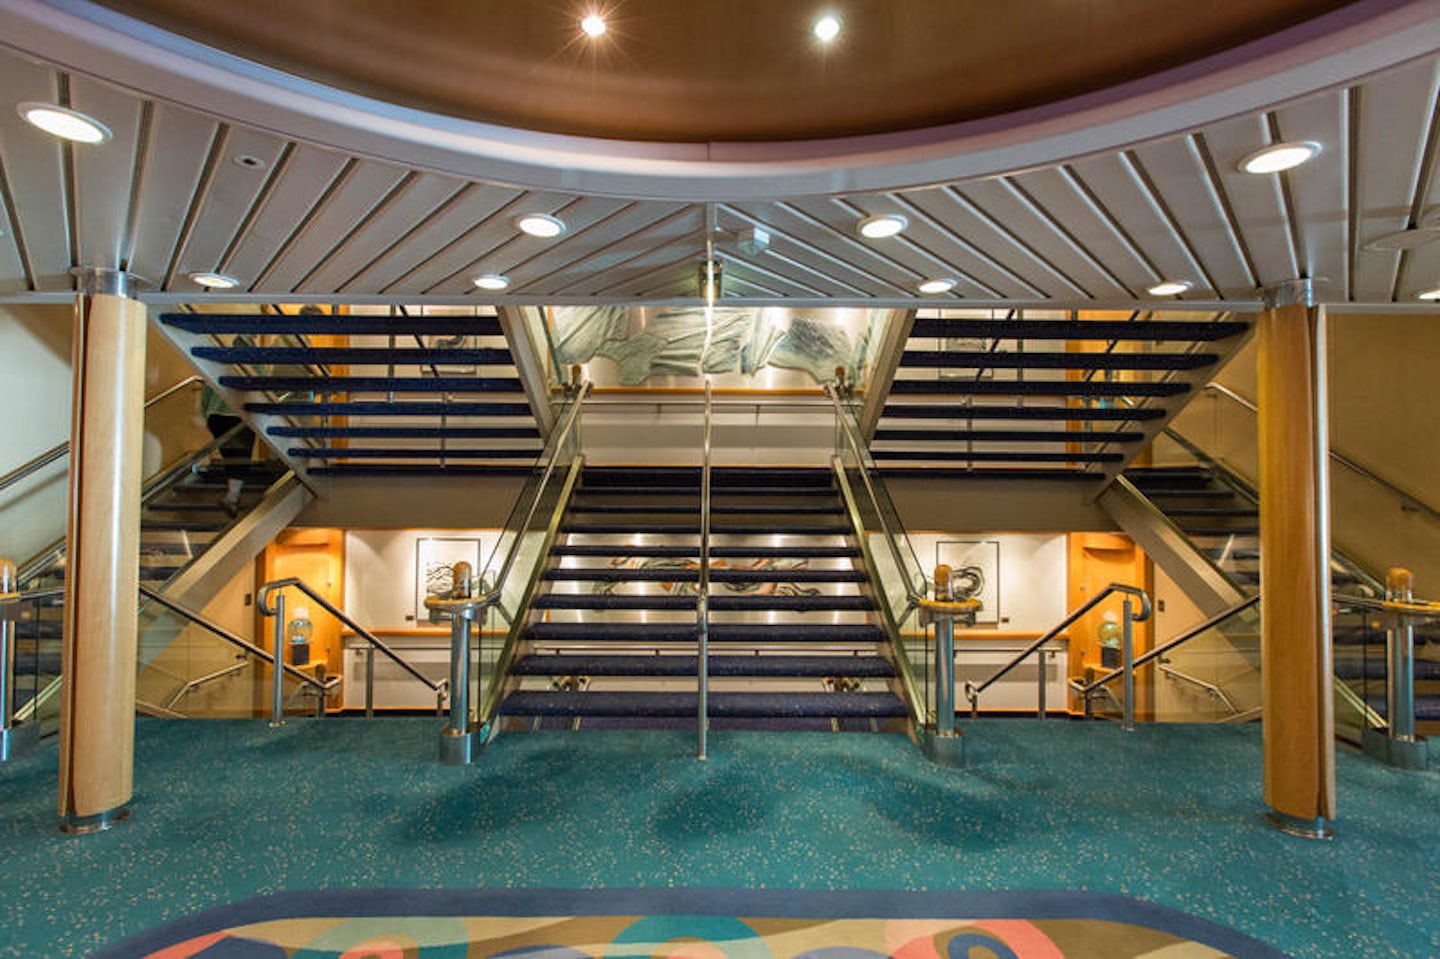 Stairs on Radiance of the Seas